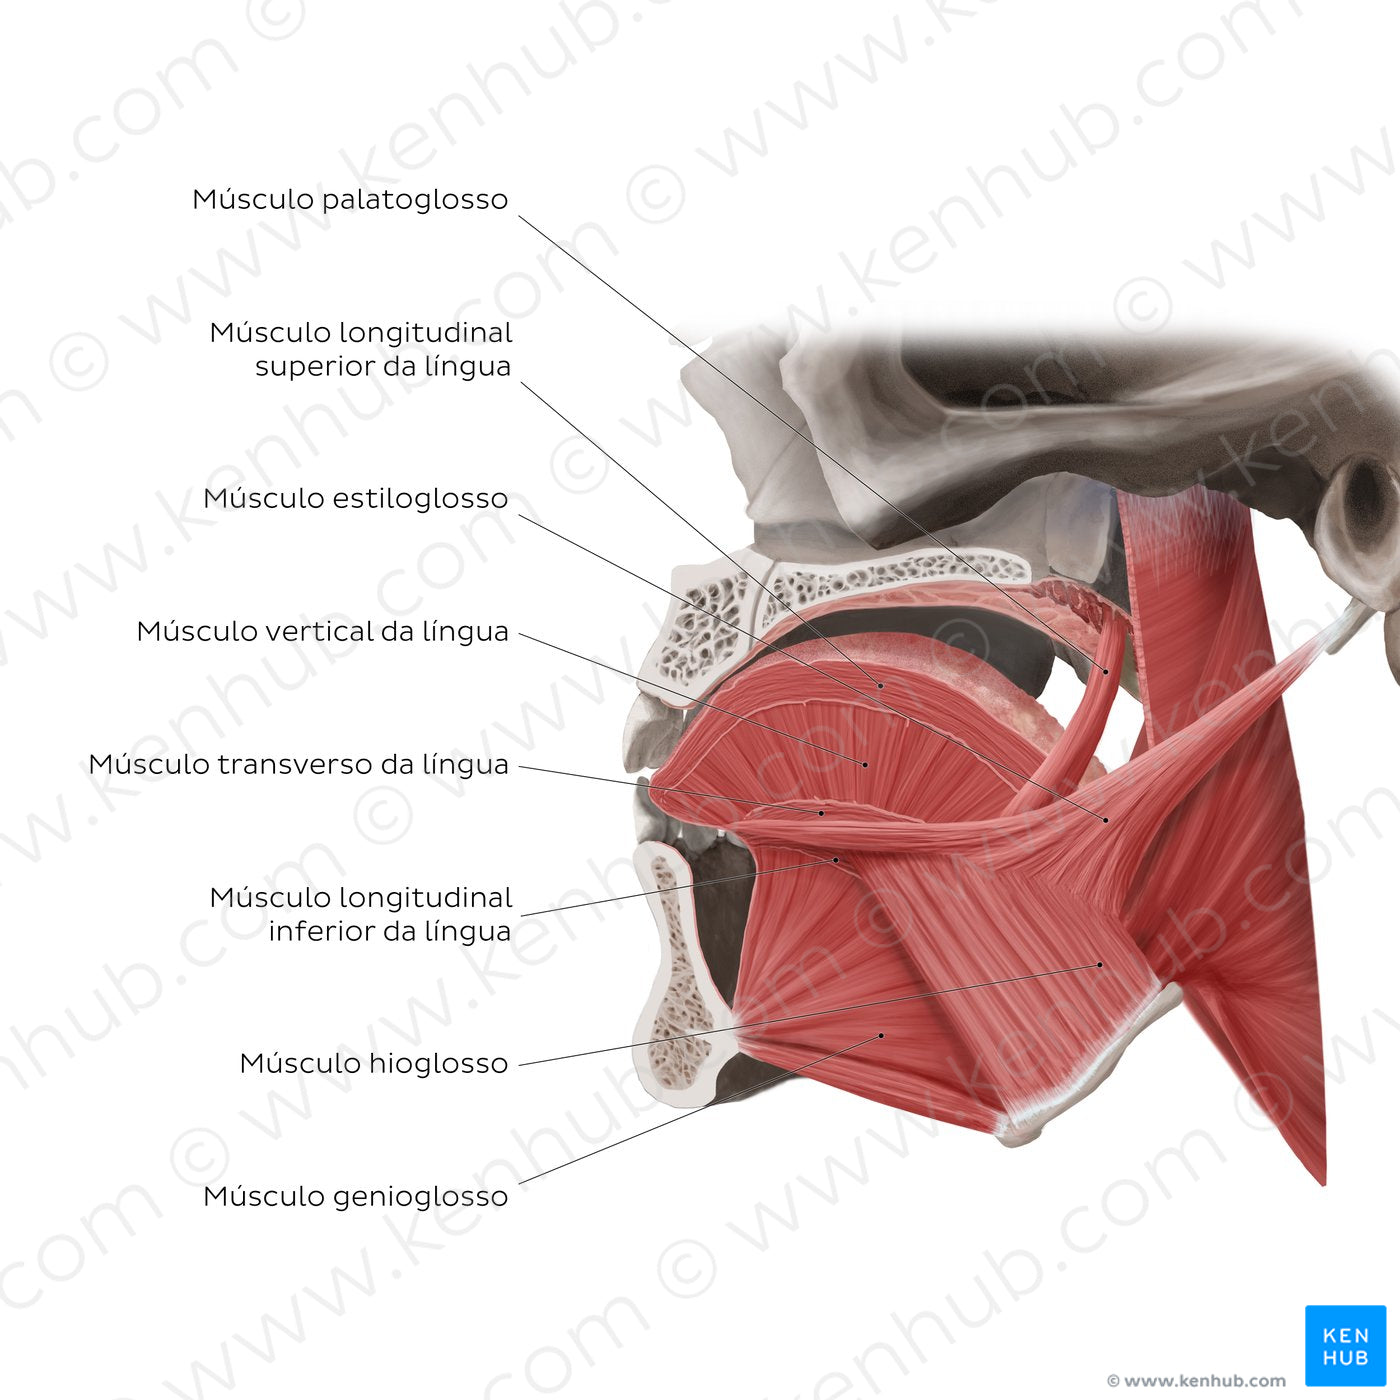 Muscles of the tongue: sagittal section (Portuguese)